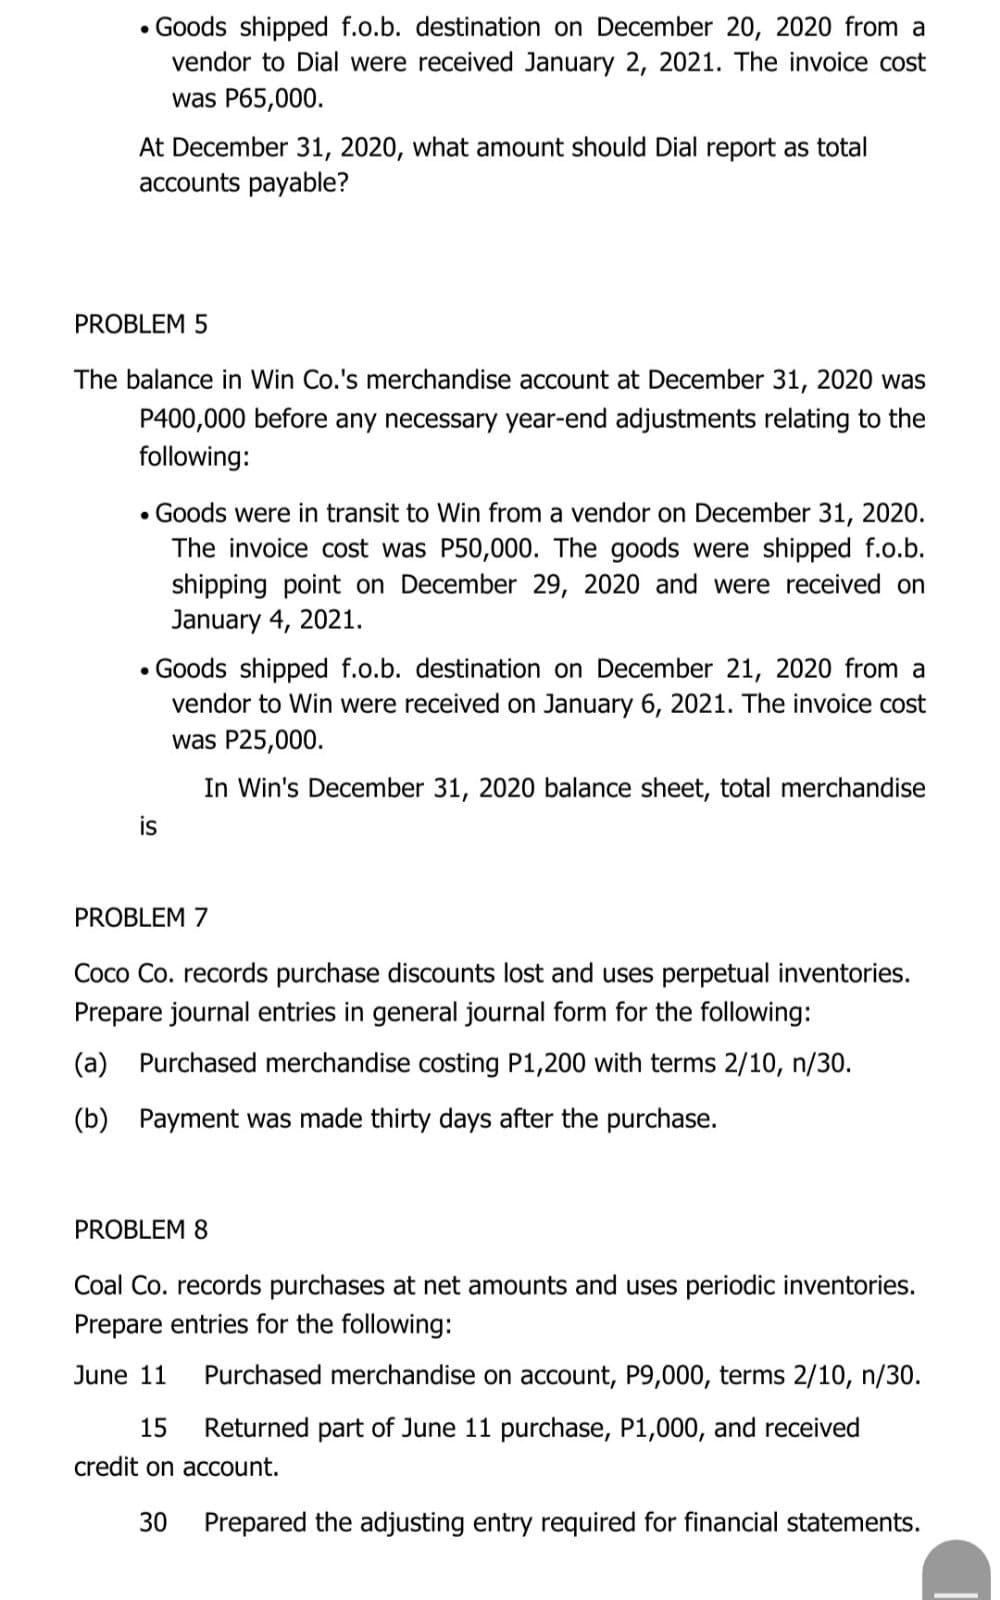 • Goods shipped f.o.b. destination on December 20, 2020 from a
vendor to Dial were received January 2, 2021. The invoice cost
was P65,000.
At December 31, 2020, what amount should Dial report as total
accounts payable?
PROBLEM 5
The balance in Win Co.'s merchandise account at December 31, 2020 was
P400,000 before any necessary year-end adjustments relating to the
following:
• Goods were in transit to Win from a vendor on December 31, 2020.
The invoice cost was P50,000. The goods were shipped f.o.b.
shipping point on December 29, 2020 and were received on
January 4, 2021.
• Goods shipped f.o.b. destination on December 21, 2020 from a
vendor to Win were received on January 6, 2021. The invoice cost
was P25,000.
In Win's December 31, 2020 balance sheet, total merchandise
is
PROBLEM 7
Coco Co. records purchase discounts lost and uses perpetual inventories.
Prepare journal entries in general journal form for the following:
(a) Purchased merchandise costing P1,200 with terms 2/10, n/30.
(b) Payment was made thirty days after the purchase.
PROBLEM 8
Coal Co. records purchases at net amounts and uses periodic inventories.
Prepare entries for the following:
June 11
Purchased merchandise on account, P9,000, terms 2/10, n/30.
15
Returned part of June 11 purchase, P1,000, and received
credit on account.
30
Prepared the adjusting entry required for financial statements.
